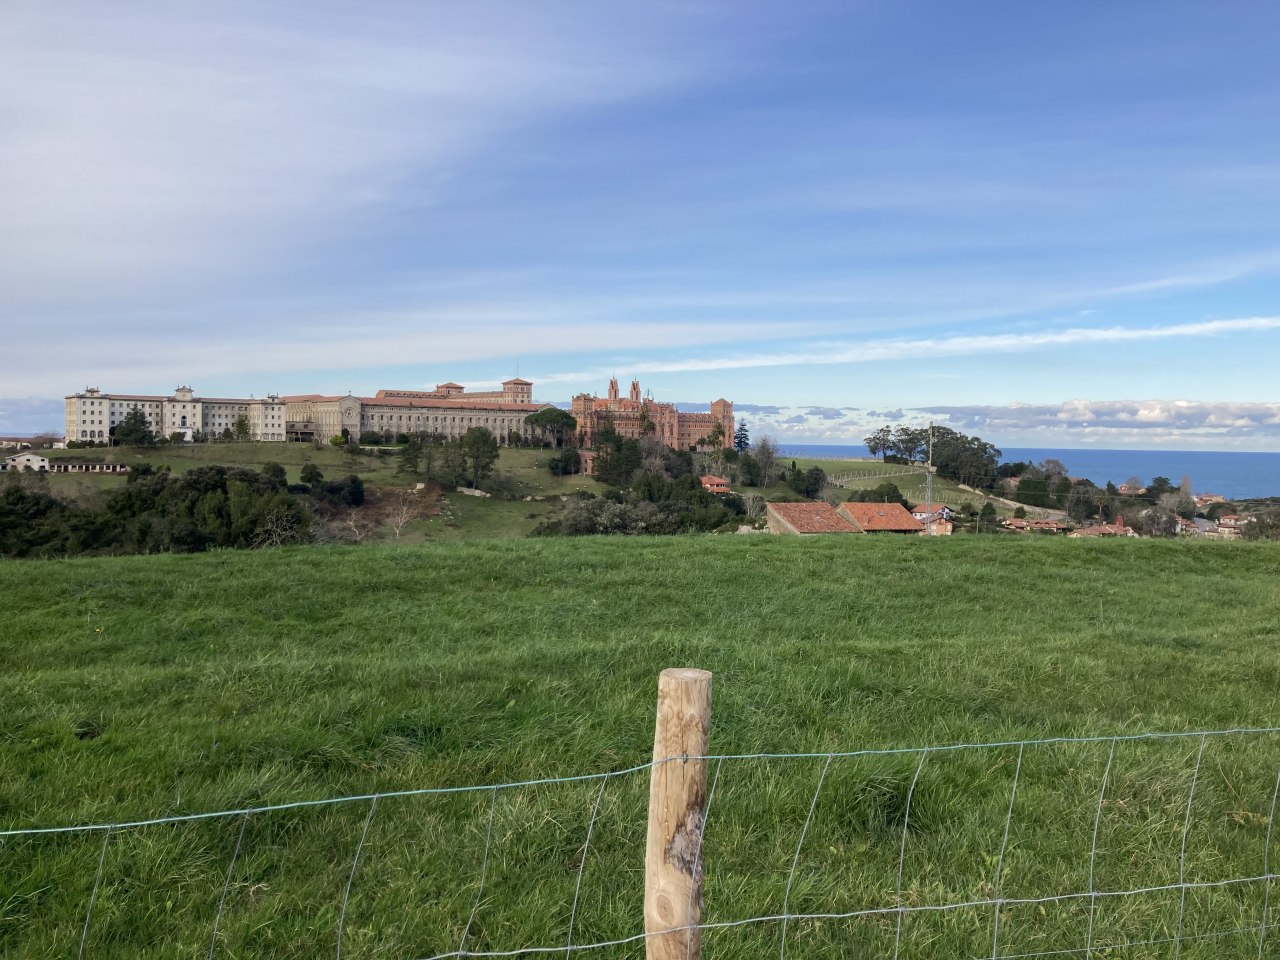 A view towards Comillas, Spain while I was on my day hike